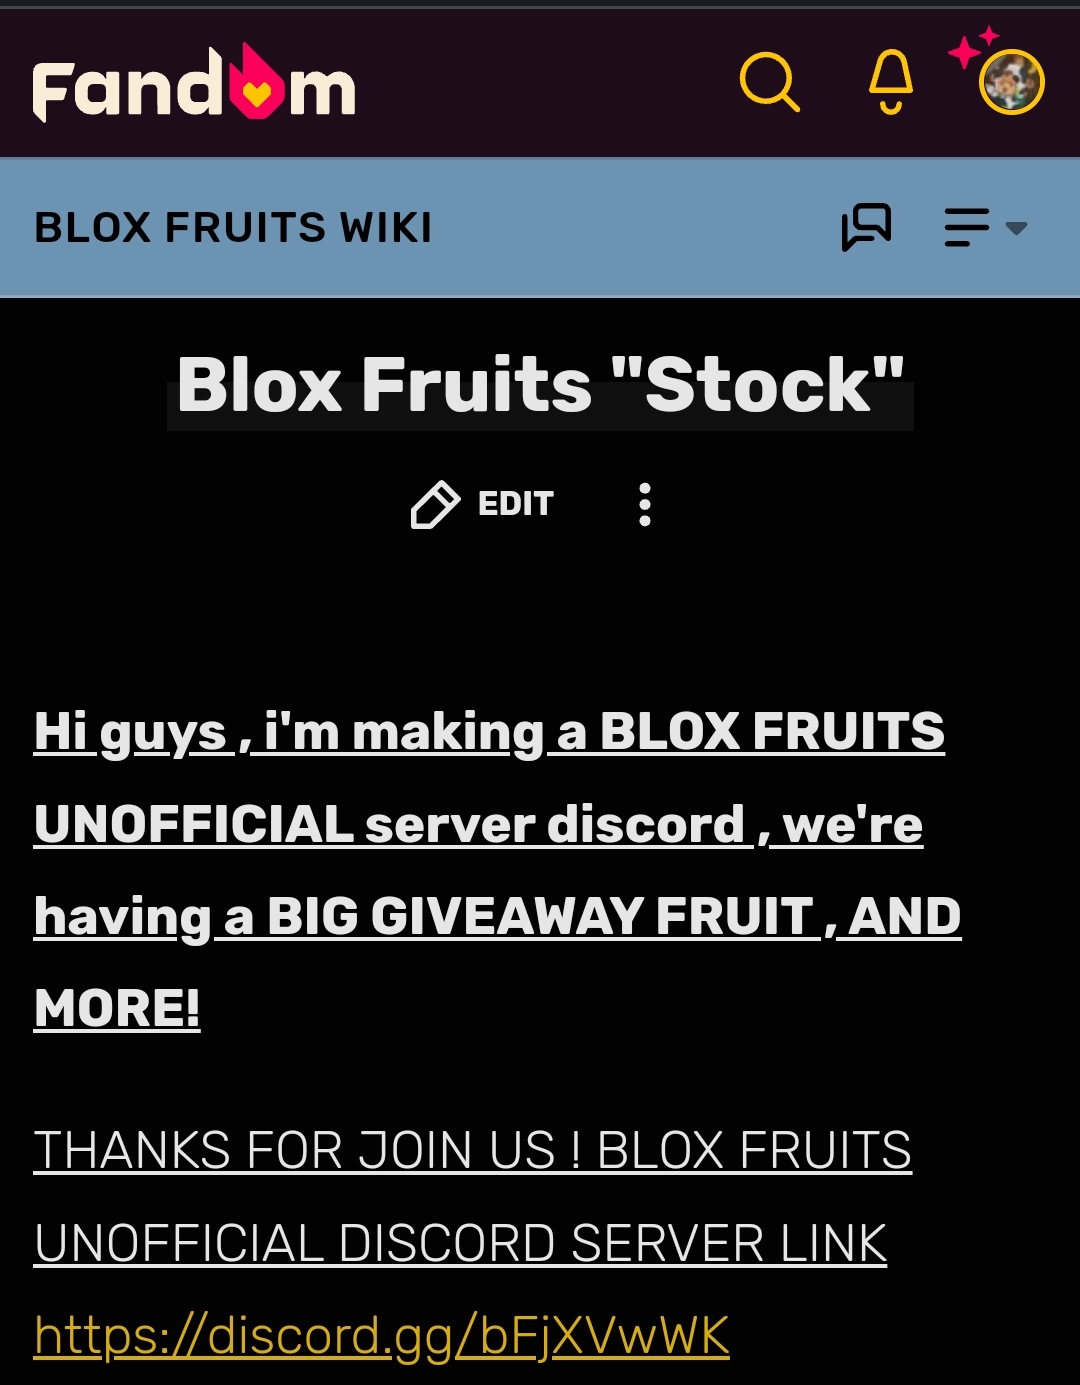 Shitpost that I found on Blox Fruits Wiki